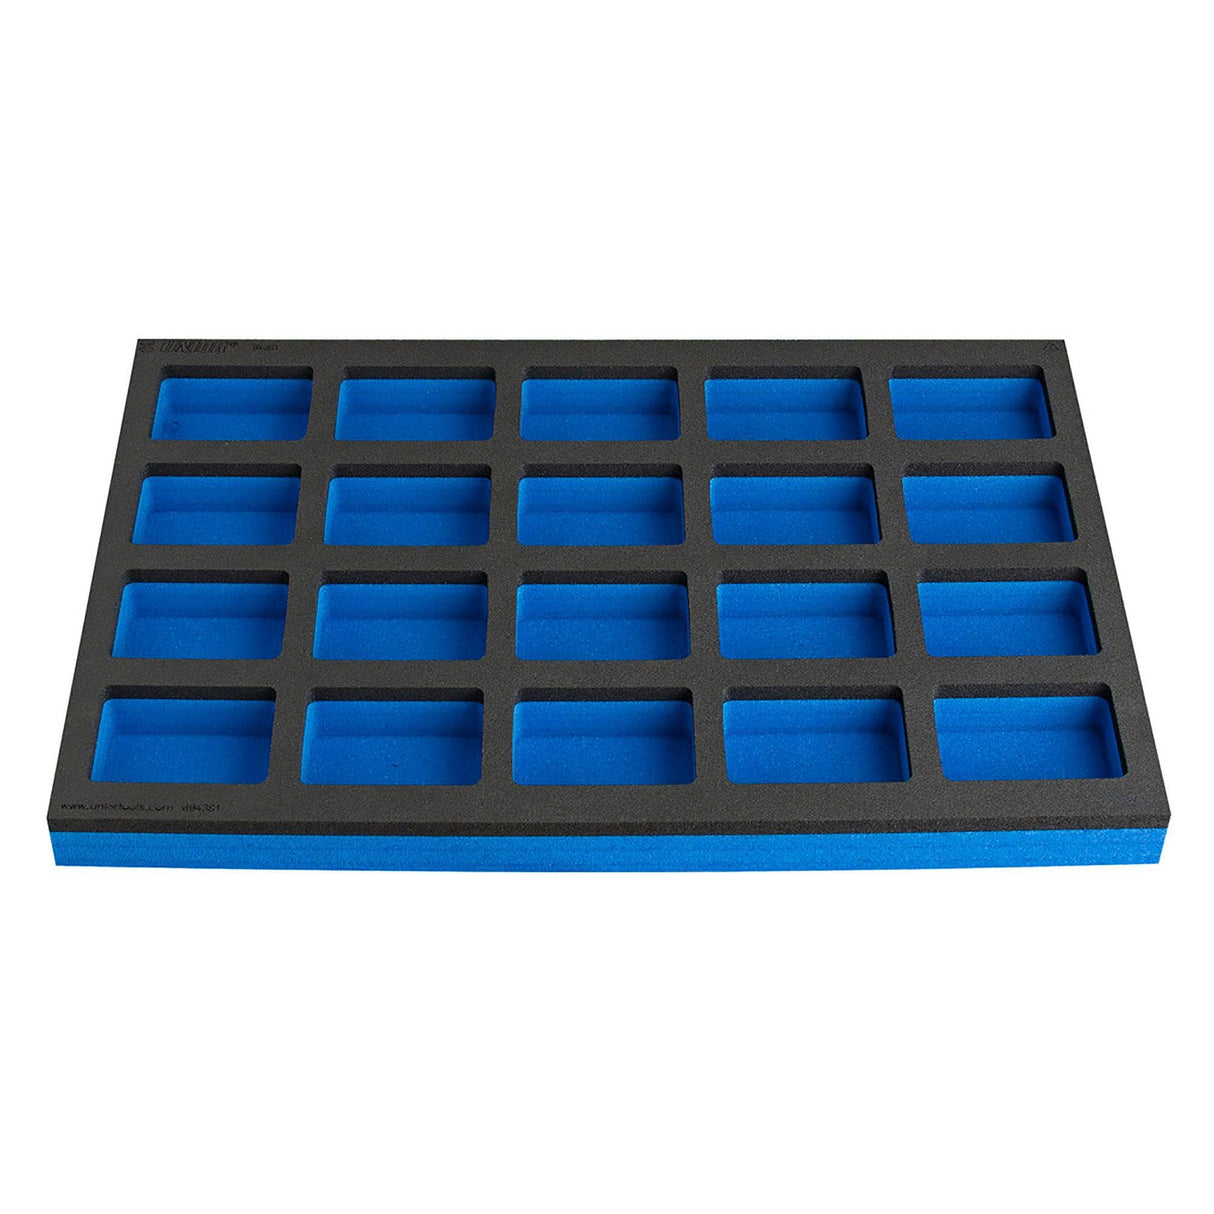 Unior Sos Tool Tray With Compartment For Work Bench Narrow Tool Chest (20 Compartments):  570 X 374Mm